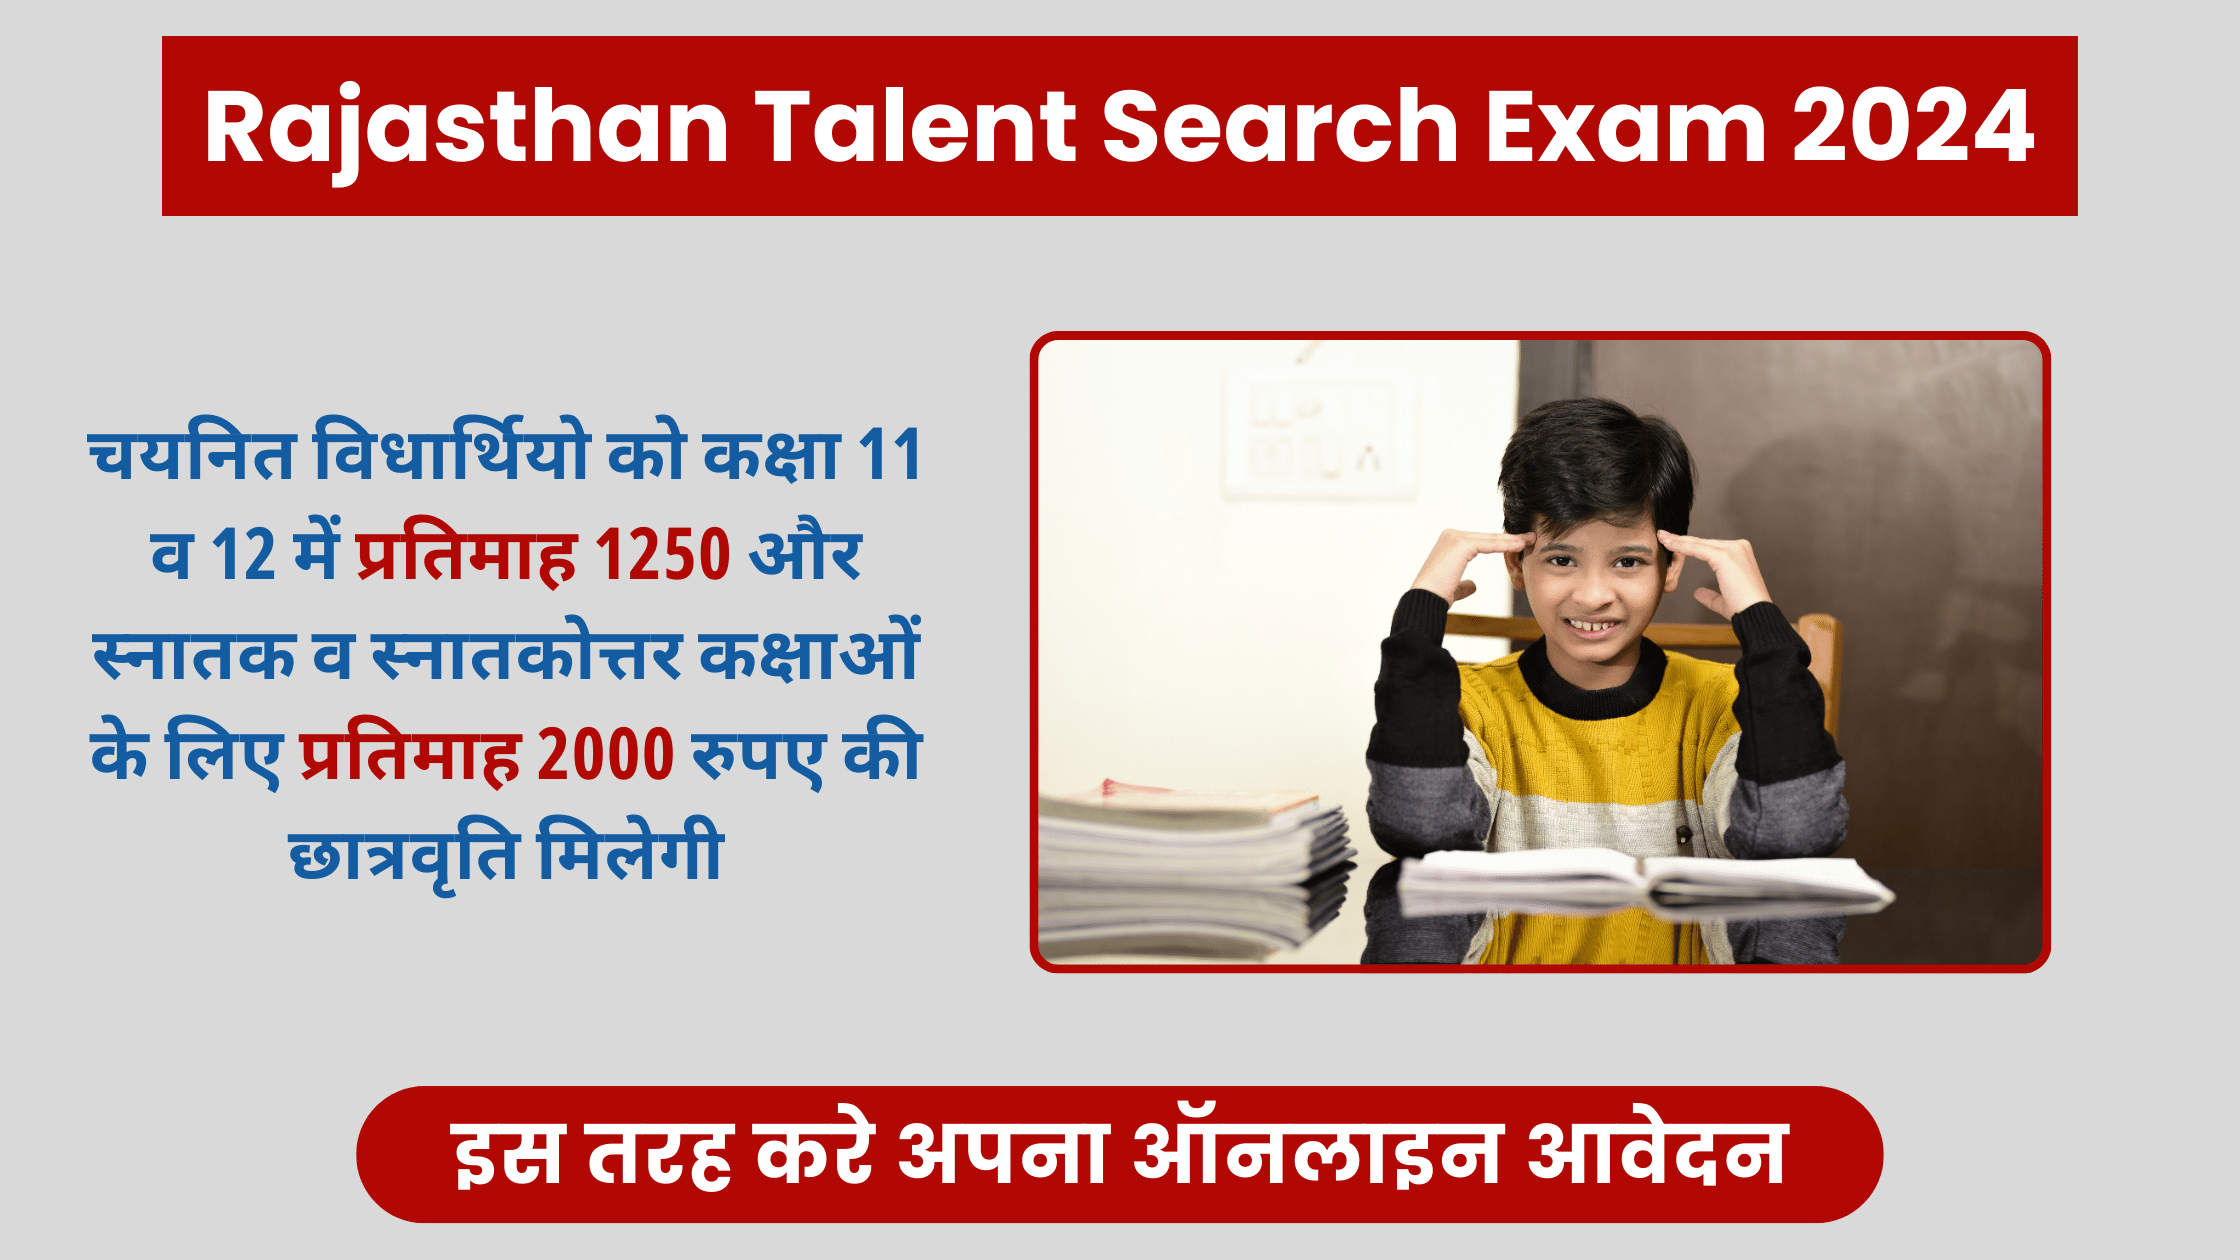 Rajasthan Talent Search Exam